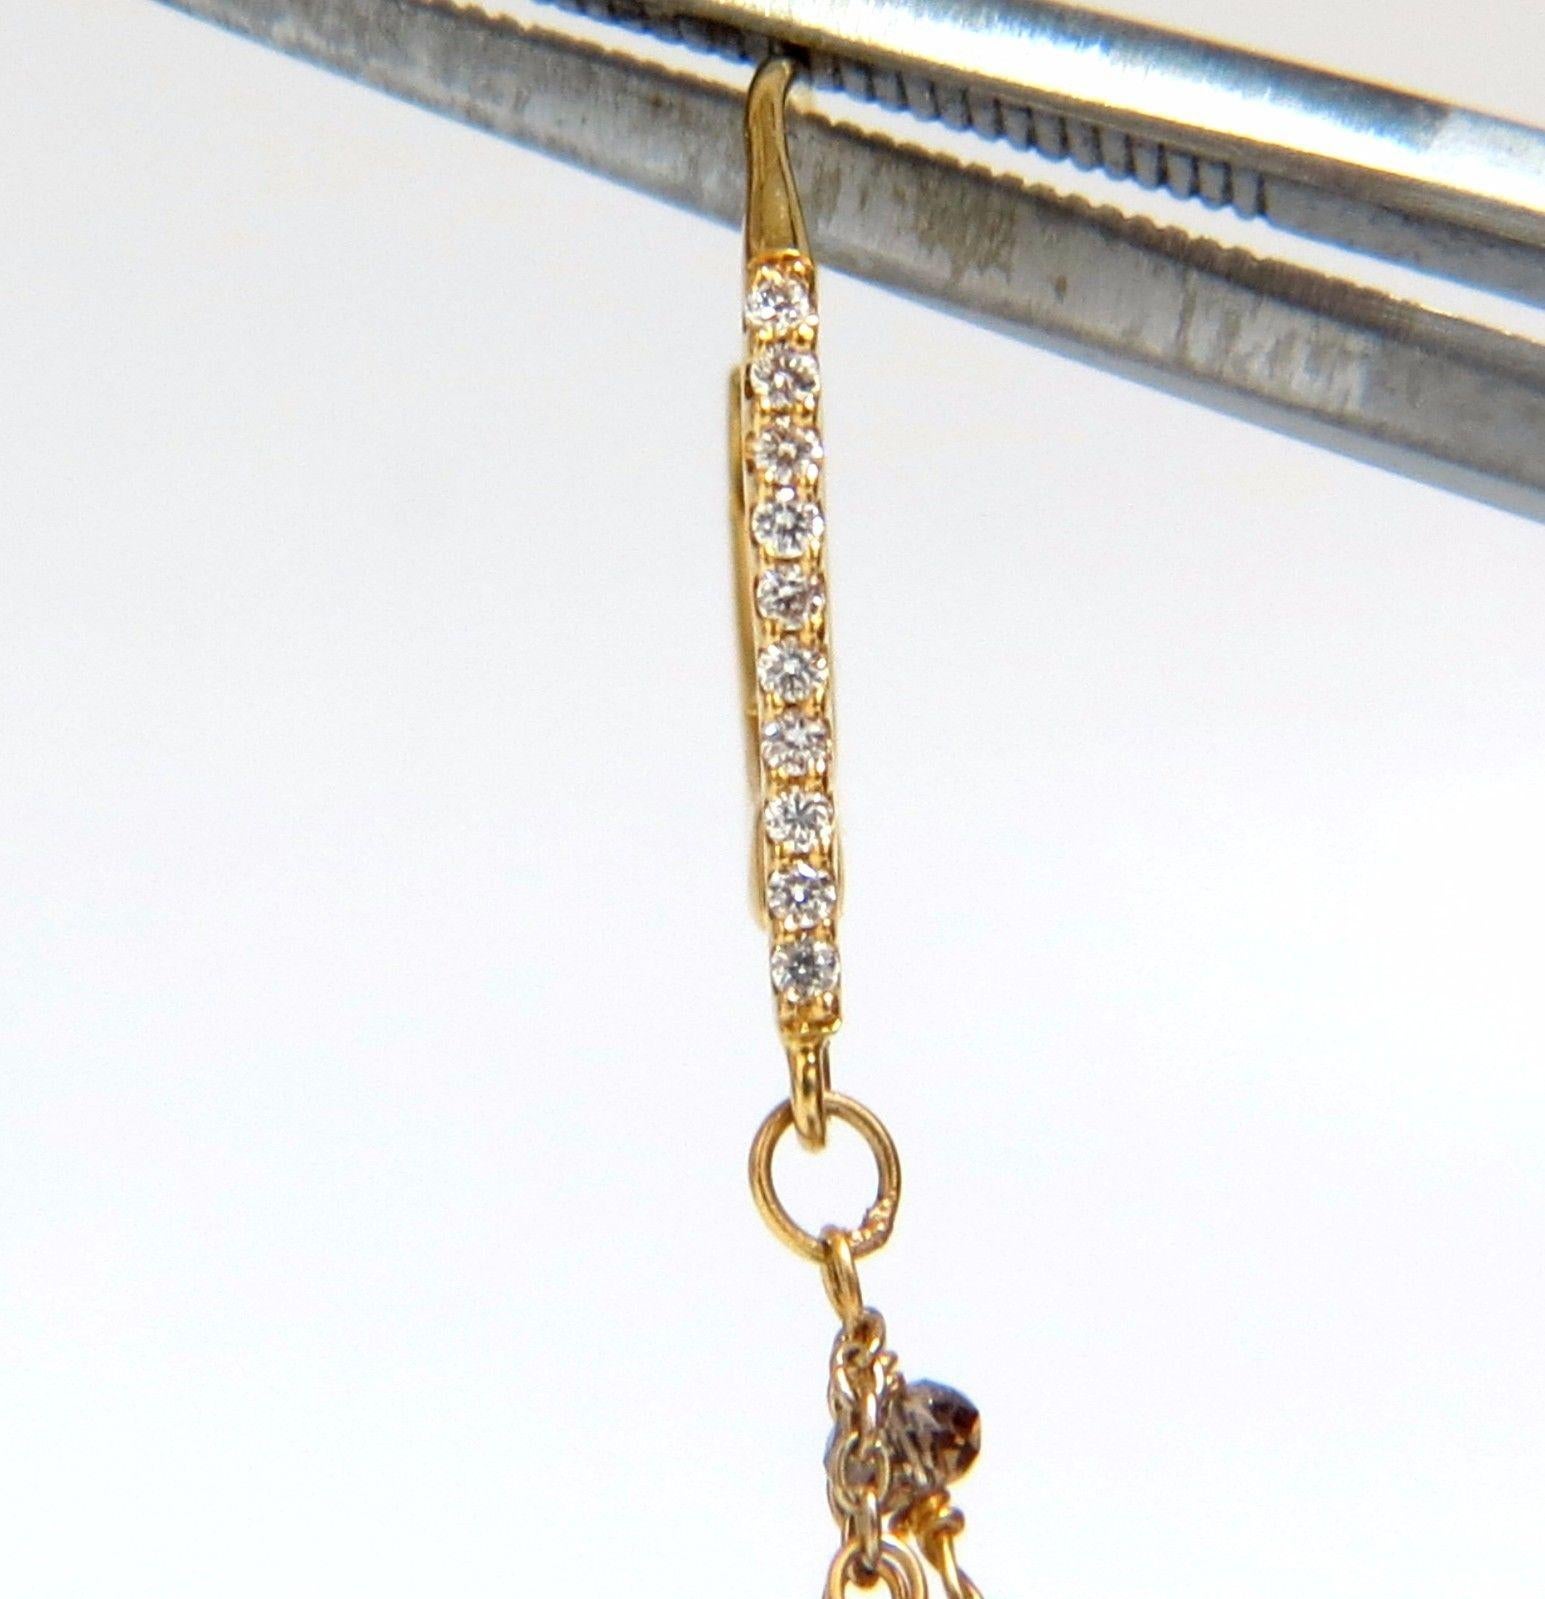 Floating Curtain / Flat Mesh 

Fancy Color Diamonds Briolette Earrings

28cts of Rose Cut / Briolette diamonds: 

Fancy Natural Browns, Yellow & Light Yellows.

Vs-2 Si-1 clarity.

.15ct. Upper Tier White Diamonds:

G-color Vs-2 clarity.

18kt.